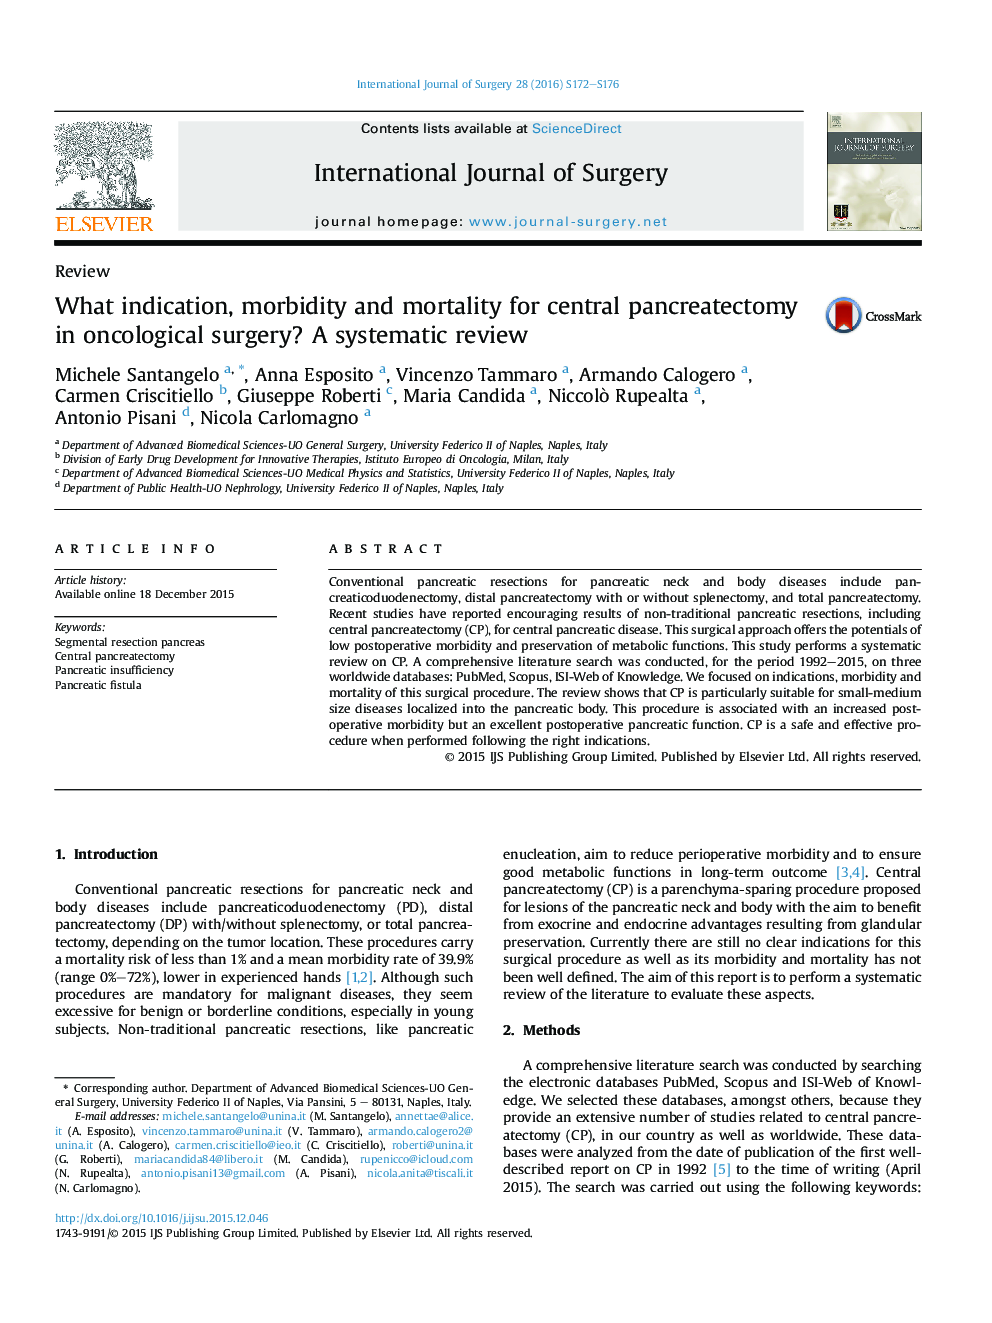 What indication, morbidity and mortality for central pancreatectomy in oncological surgery? A systematic review